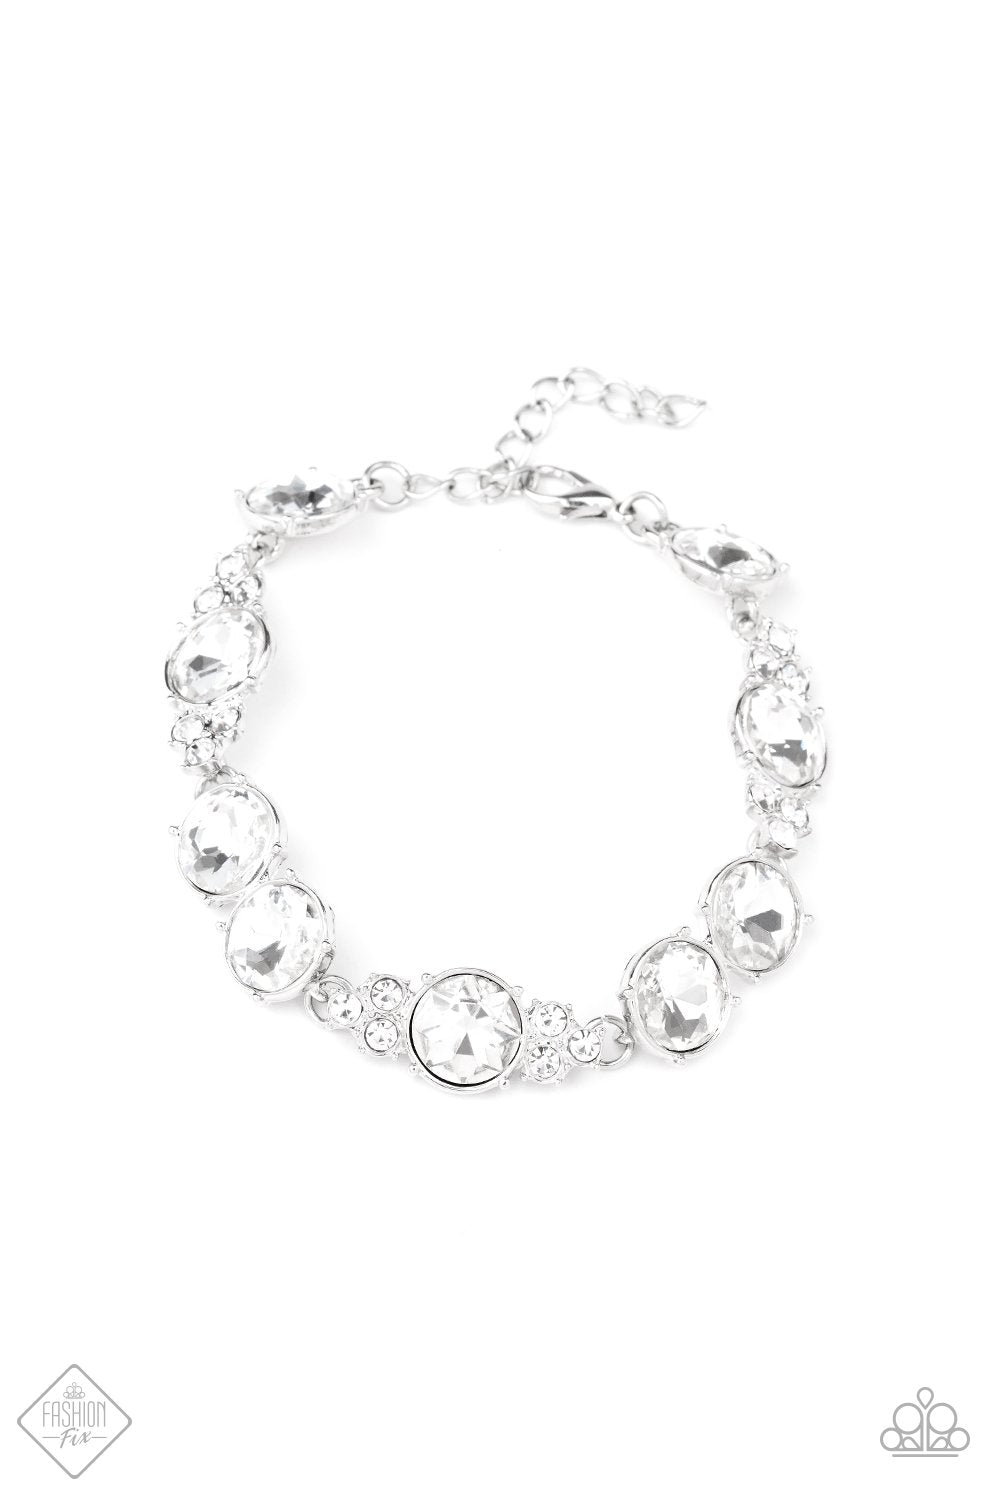 Care To Make A Wager? - White gems Bracelet